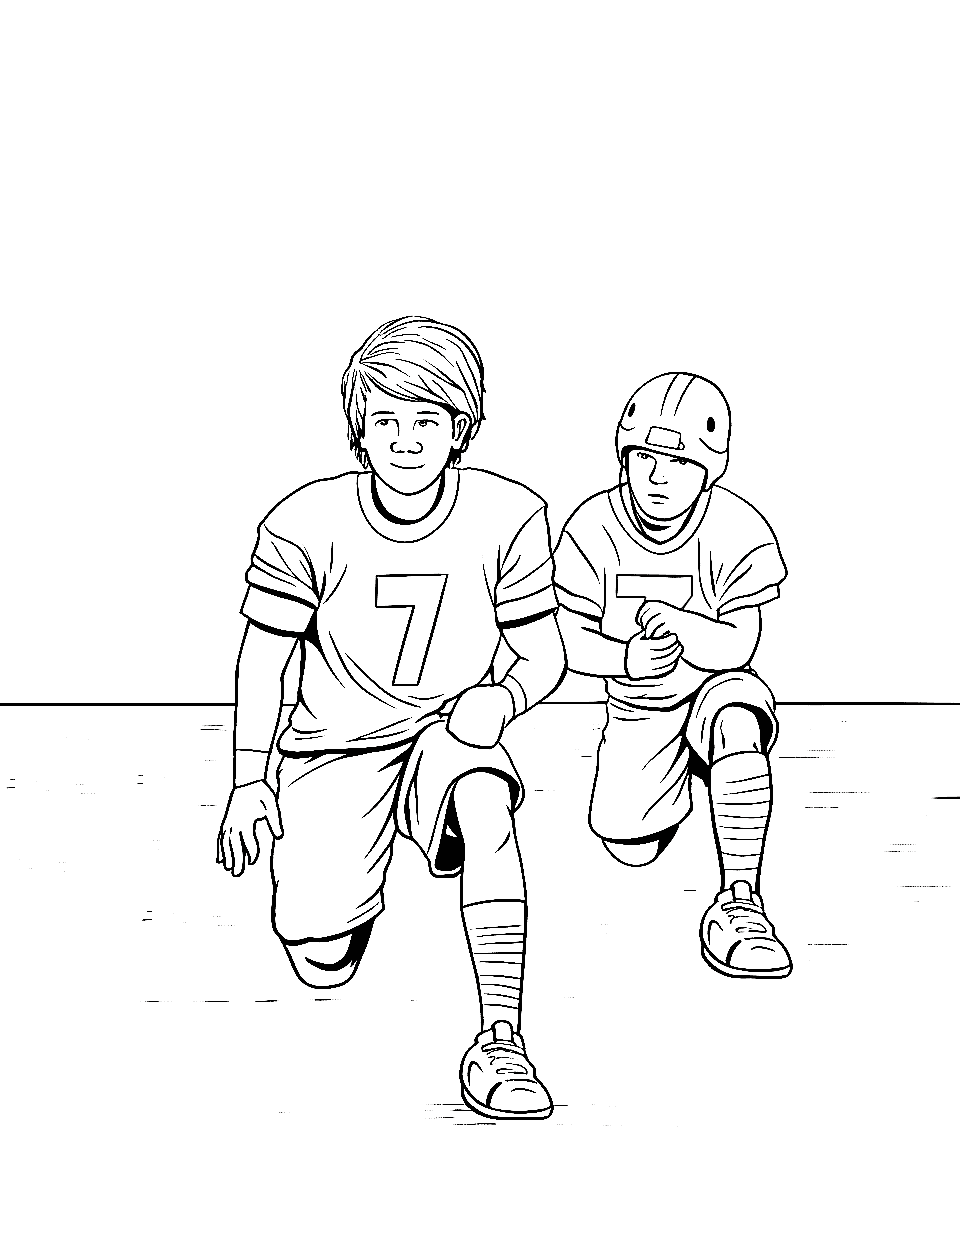 Game-Day Warmup Coloring Page - Players stretching and warming up on the field.